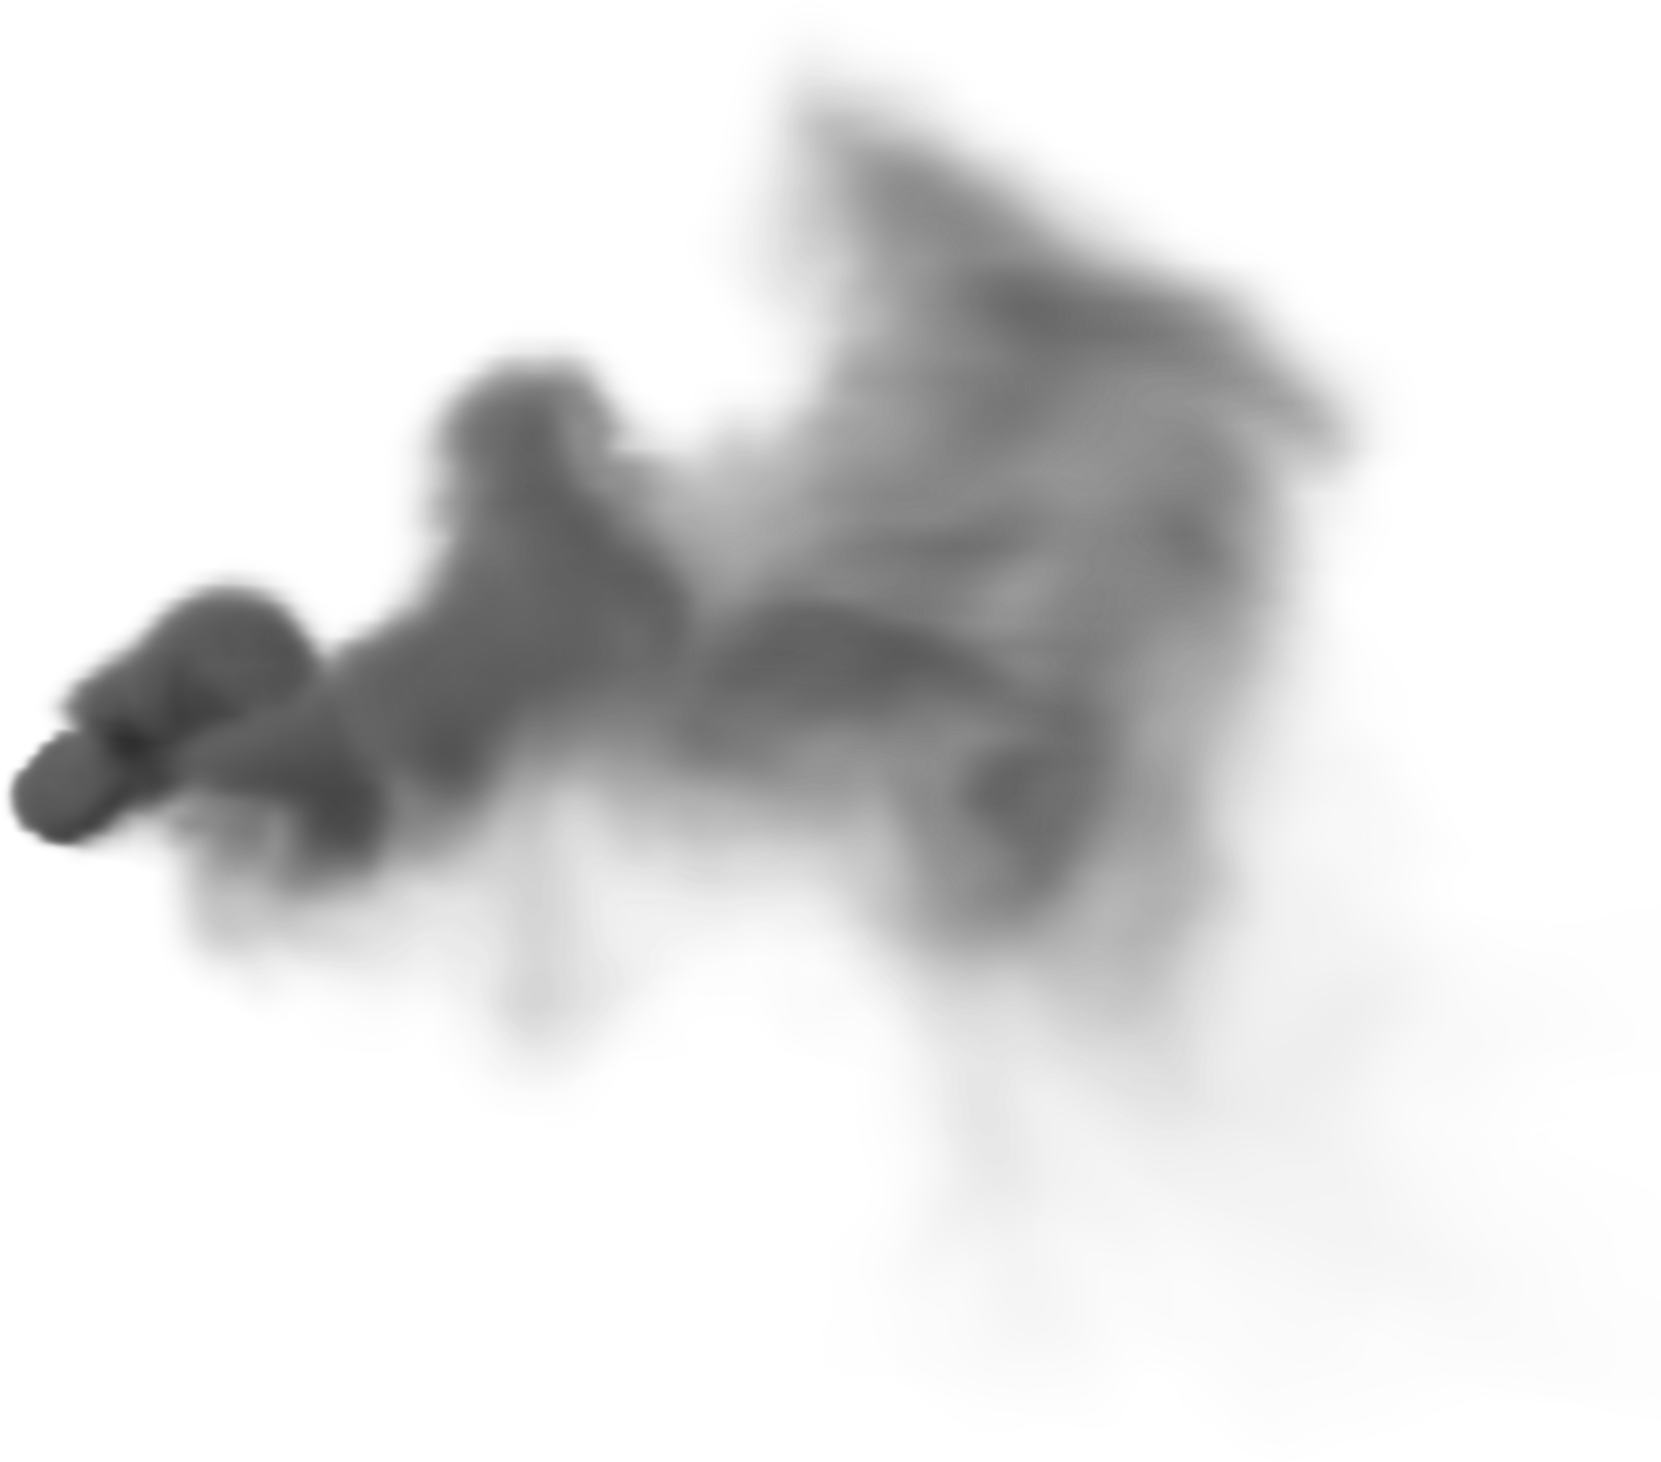 Abstract Smoke Plume Graphic PNG